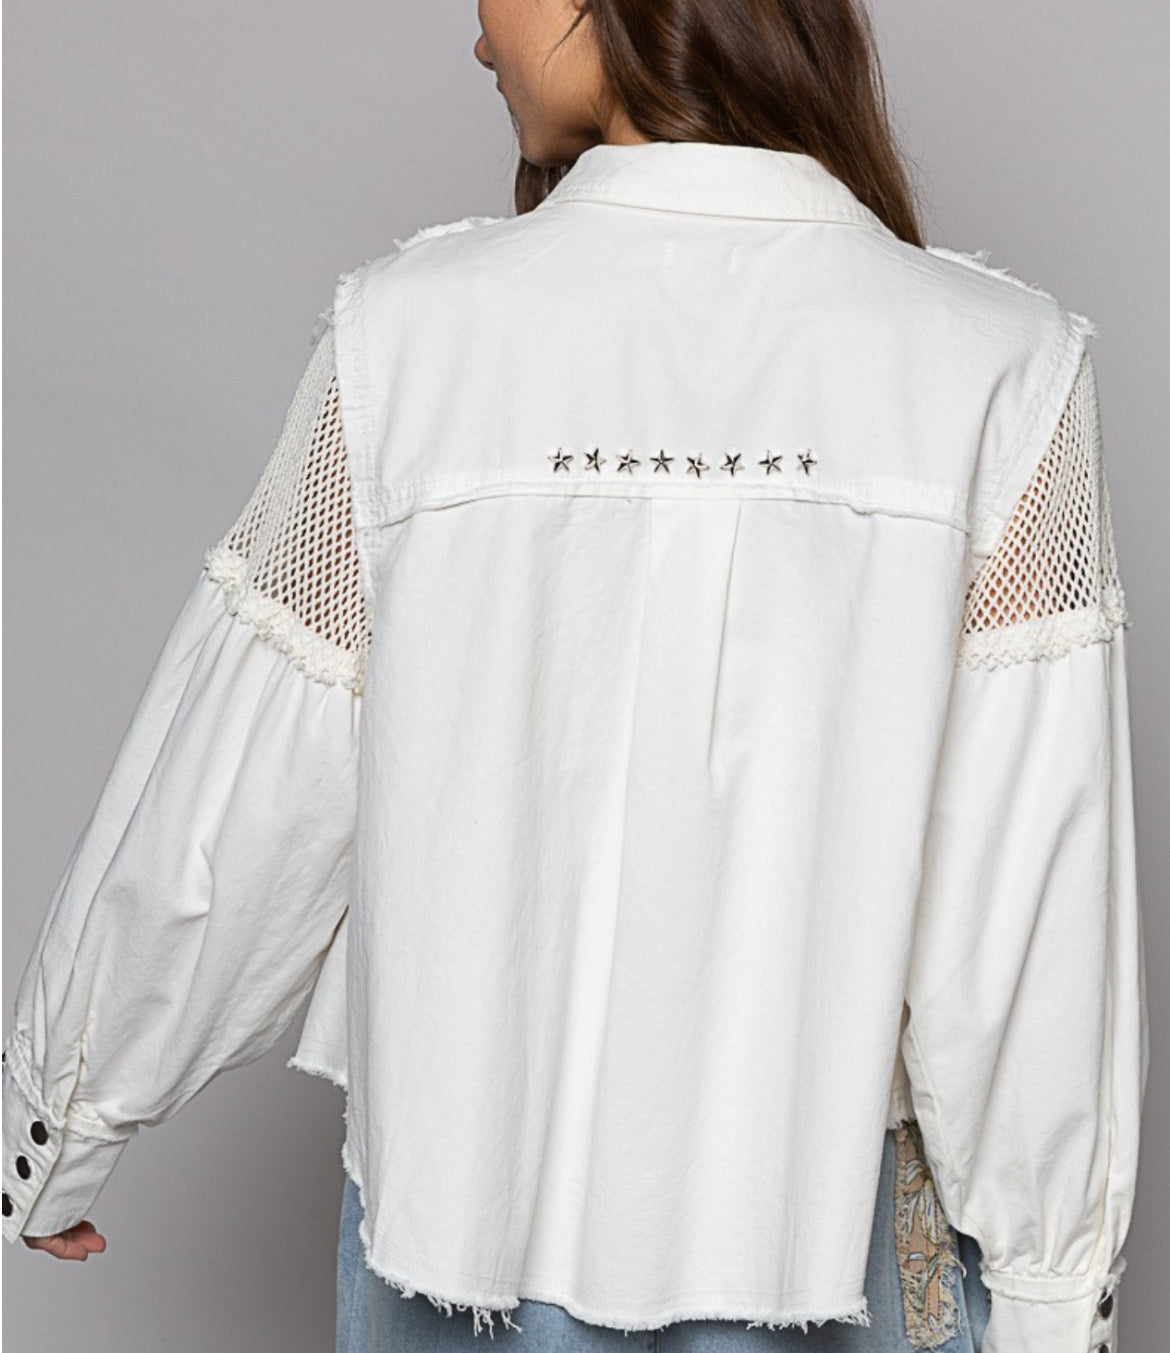 Off white jacket with star studs and net inserts